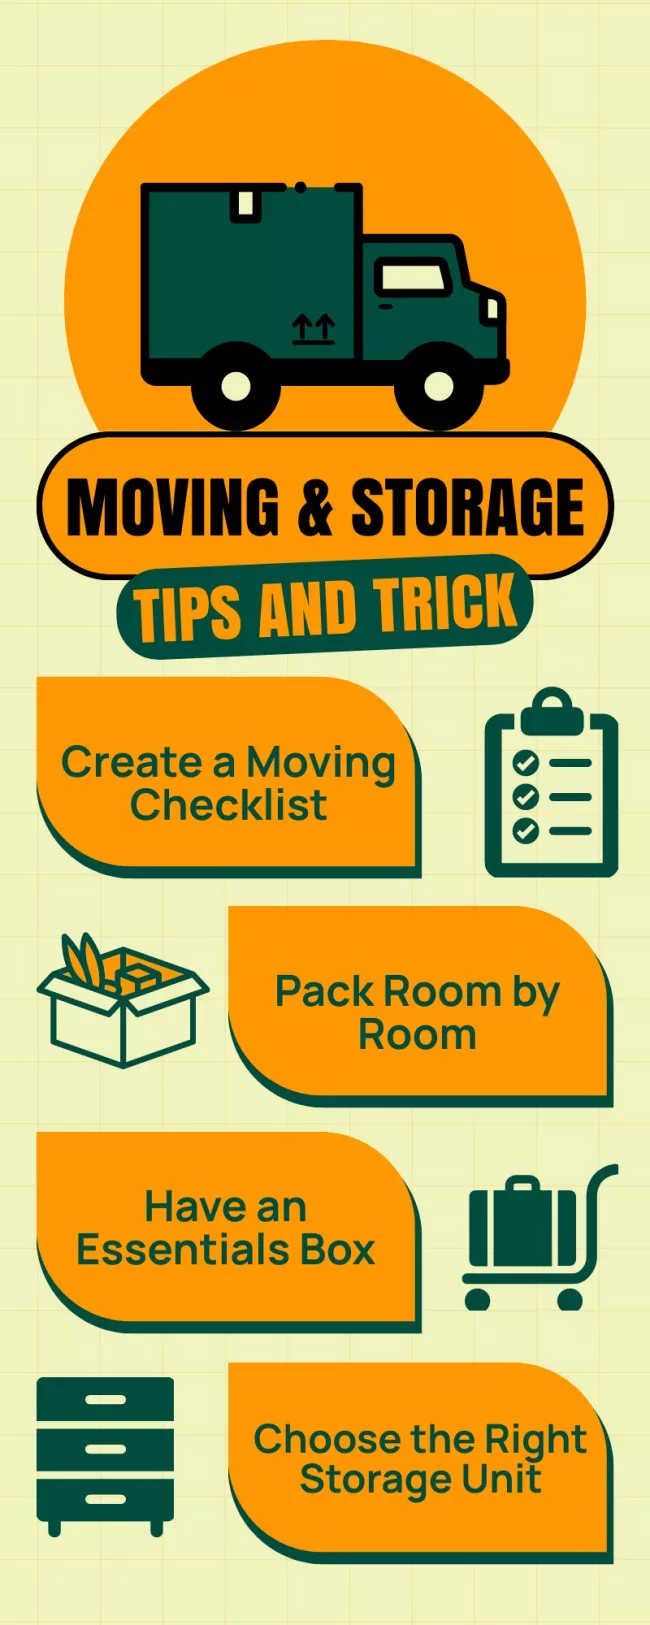 Moving & Storage Tips and Tricks with Illustration of Truck